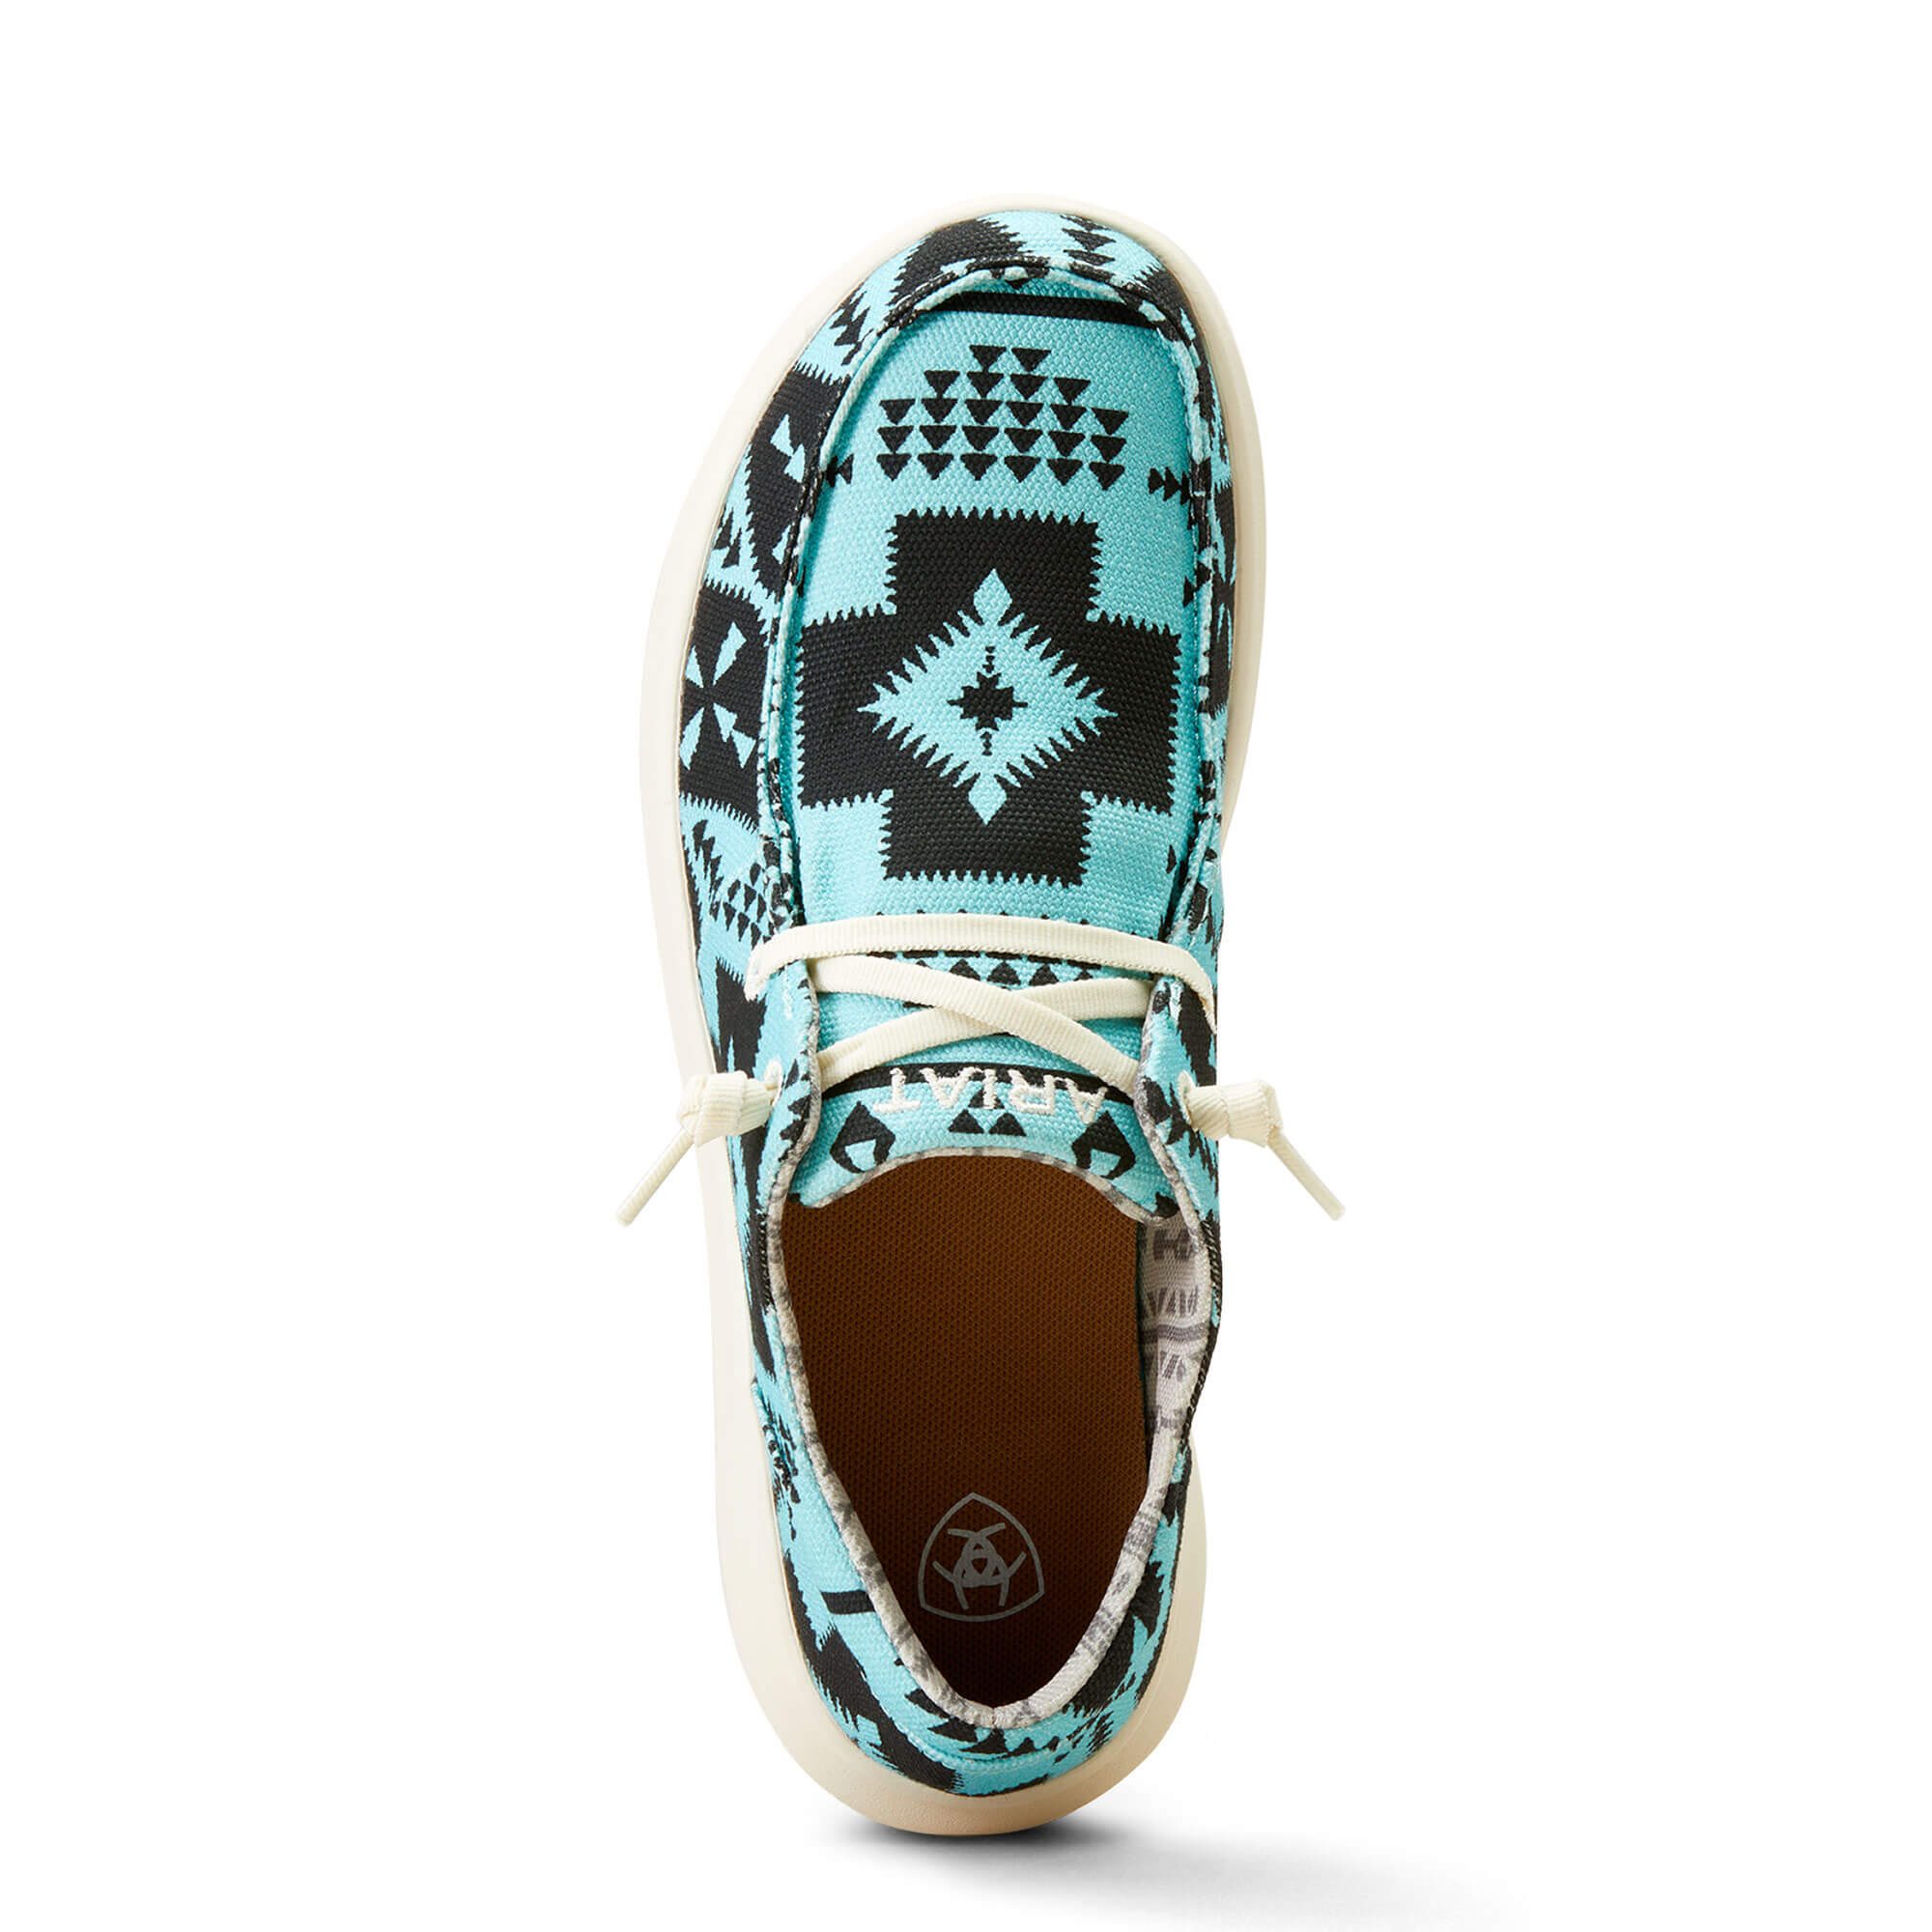 Ariat Hilo Turquoise Saddle Blanket top view